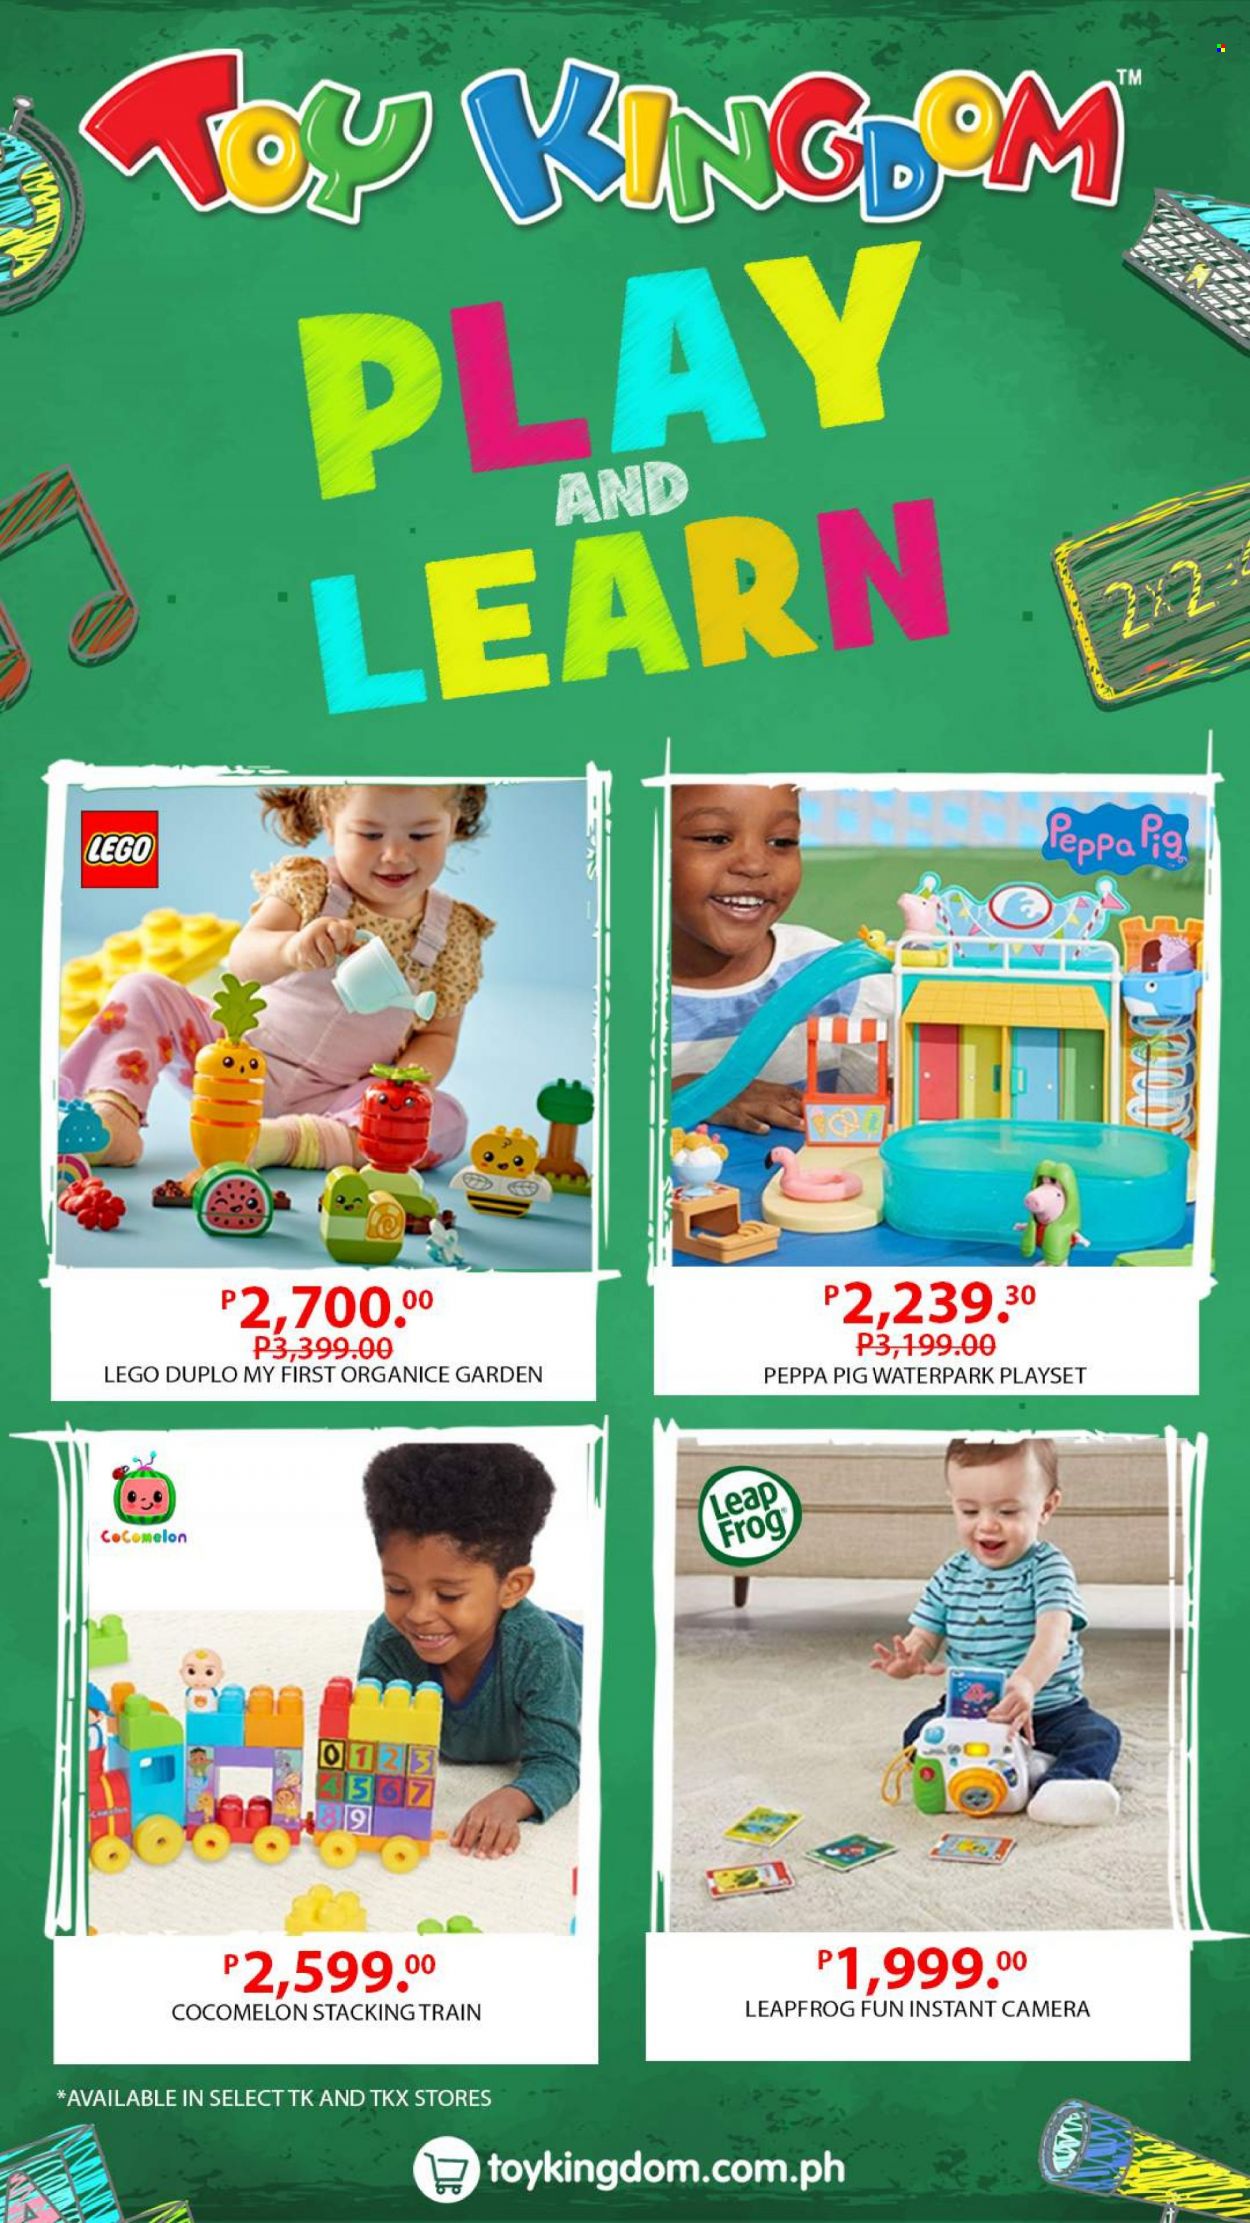 Toy Kingdom offer  - Sales products - Peppa Pig, LeapFrog, LEGO, LEGO Duplo, play set, train. Page 1.